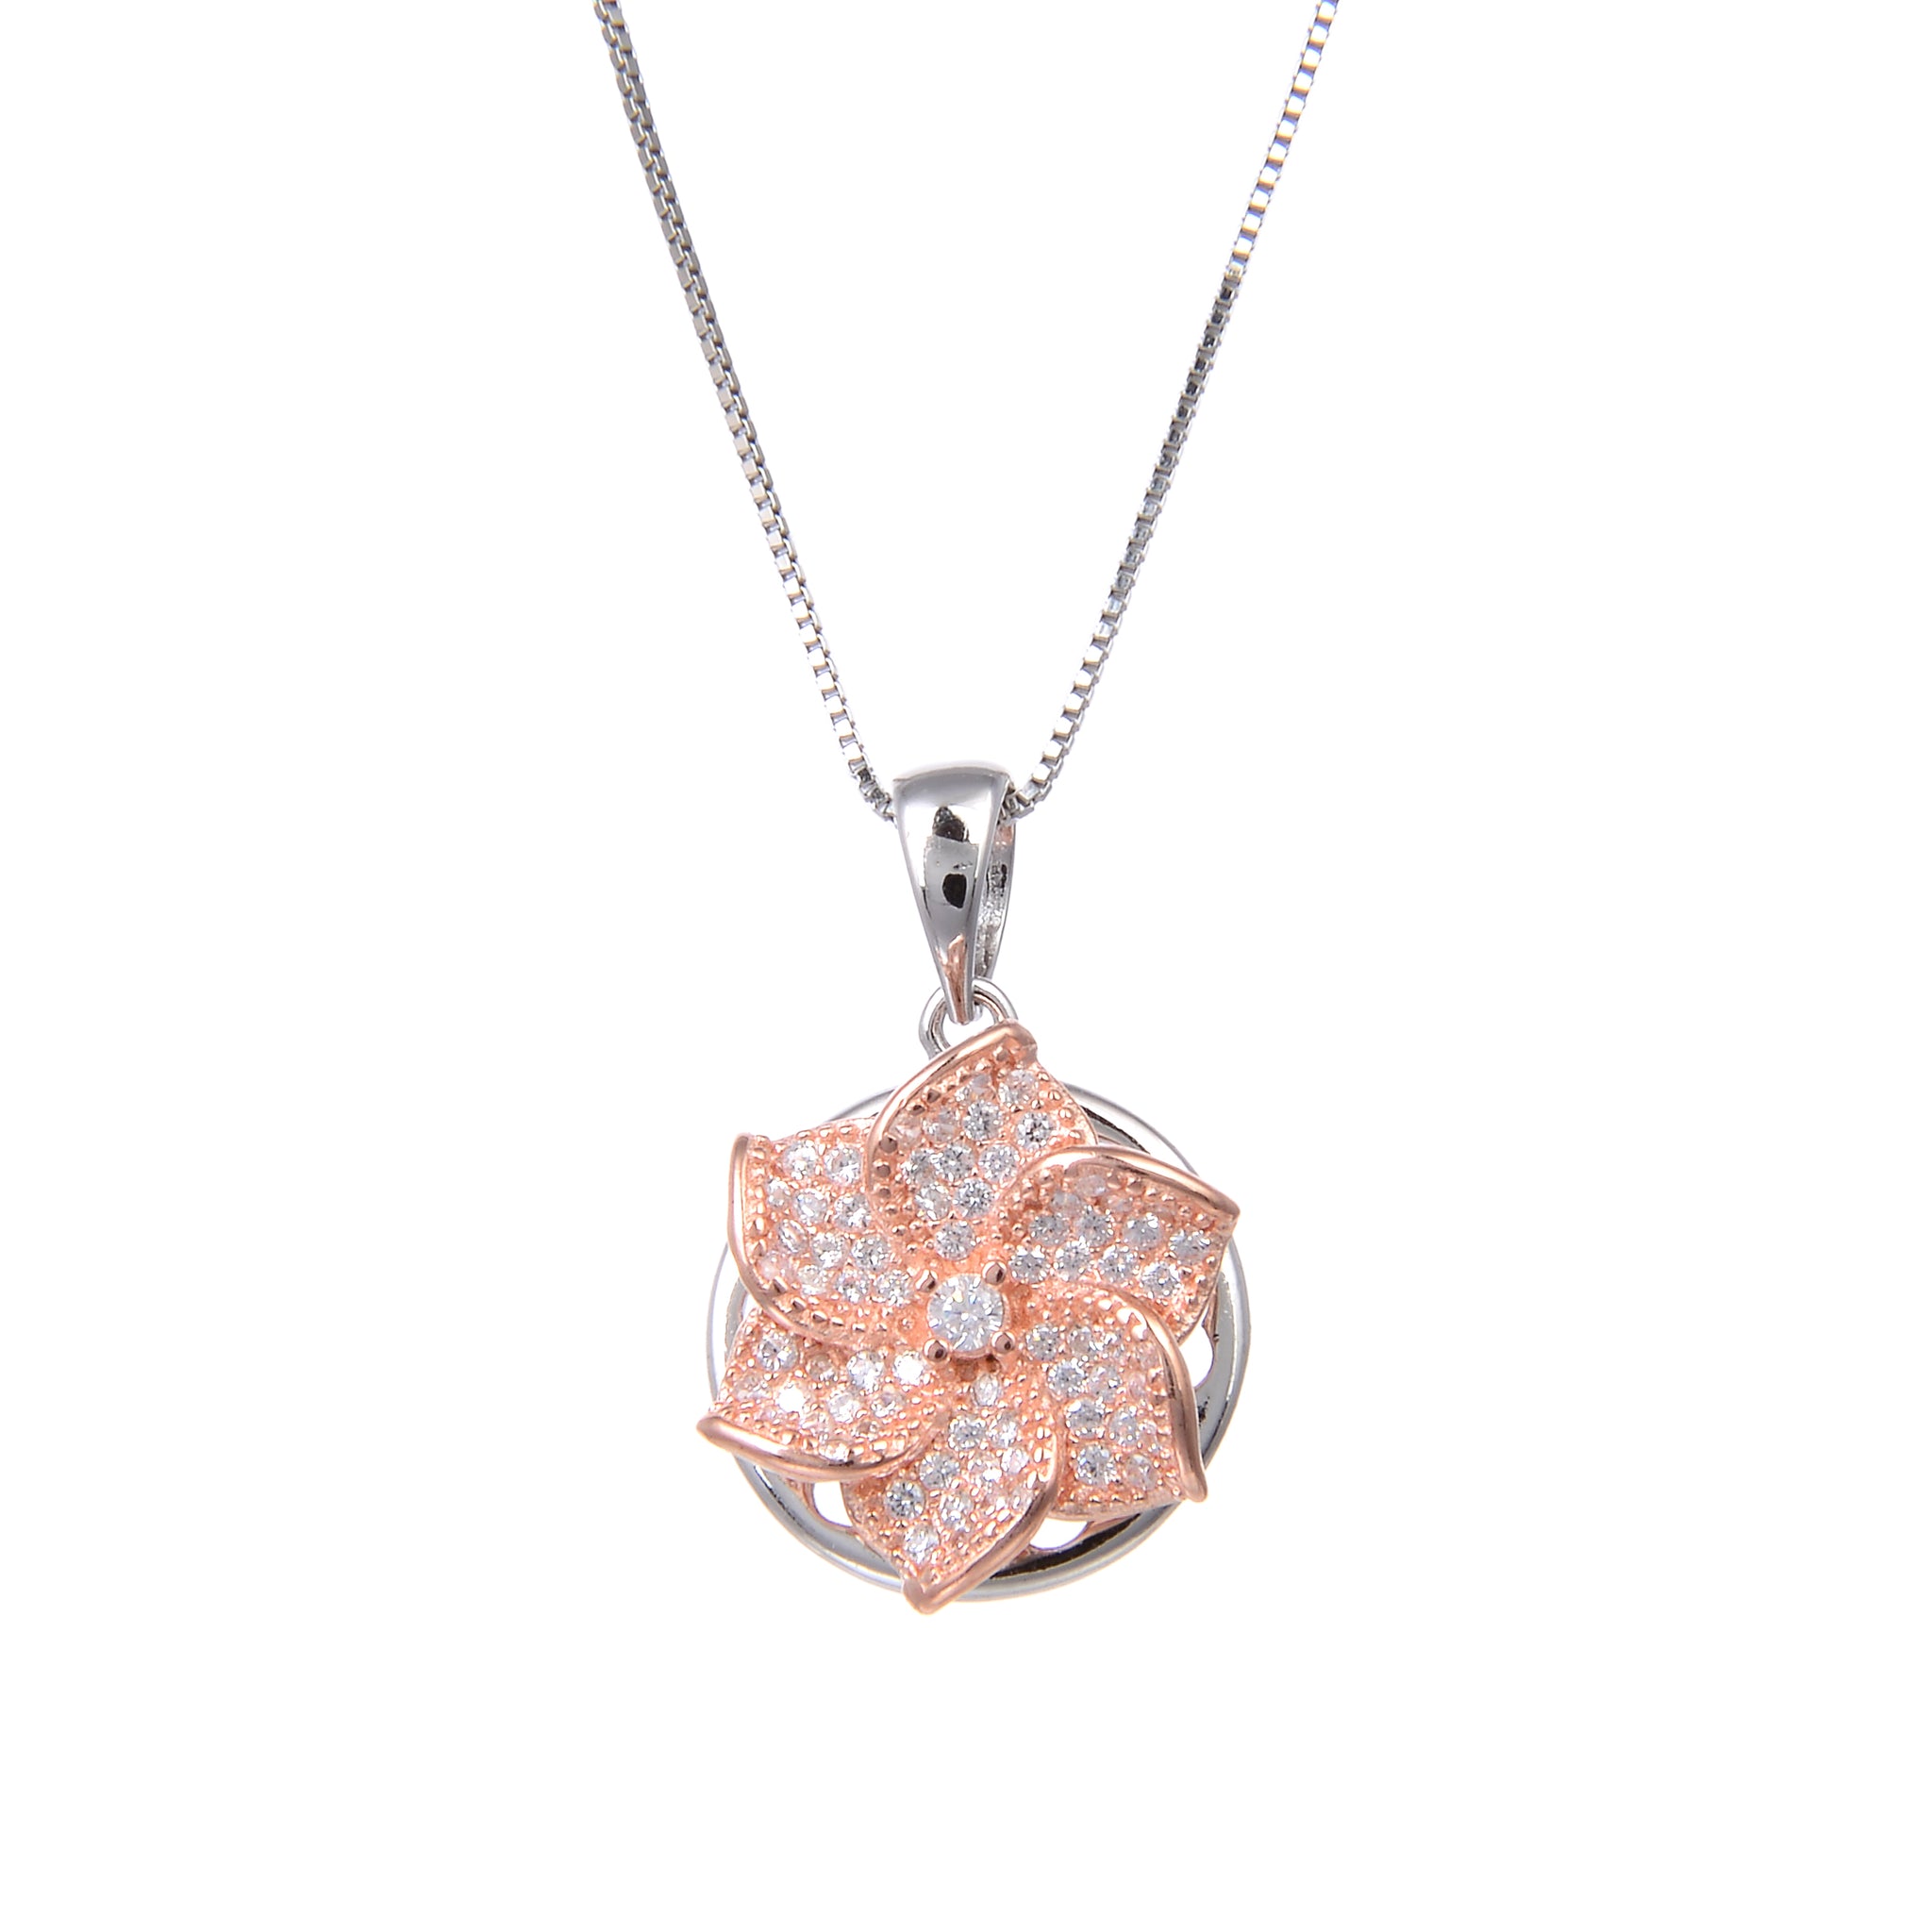 92.5 Sterling Silver Rose Gold Plated Spin Flower Shape CZ Cubic Zirconia Pendant with Sterling Silver Necklace Chain